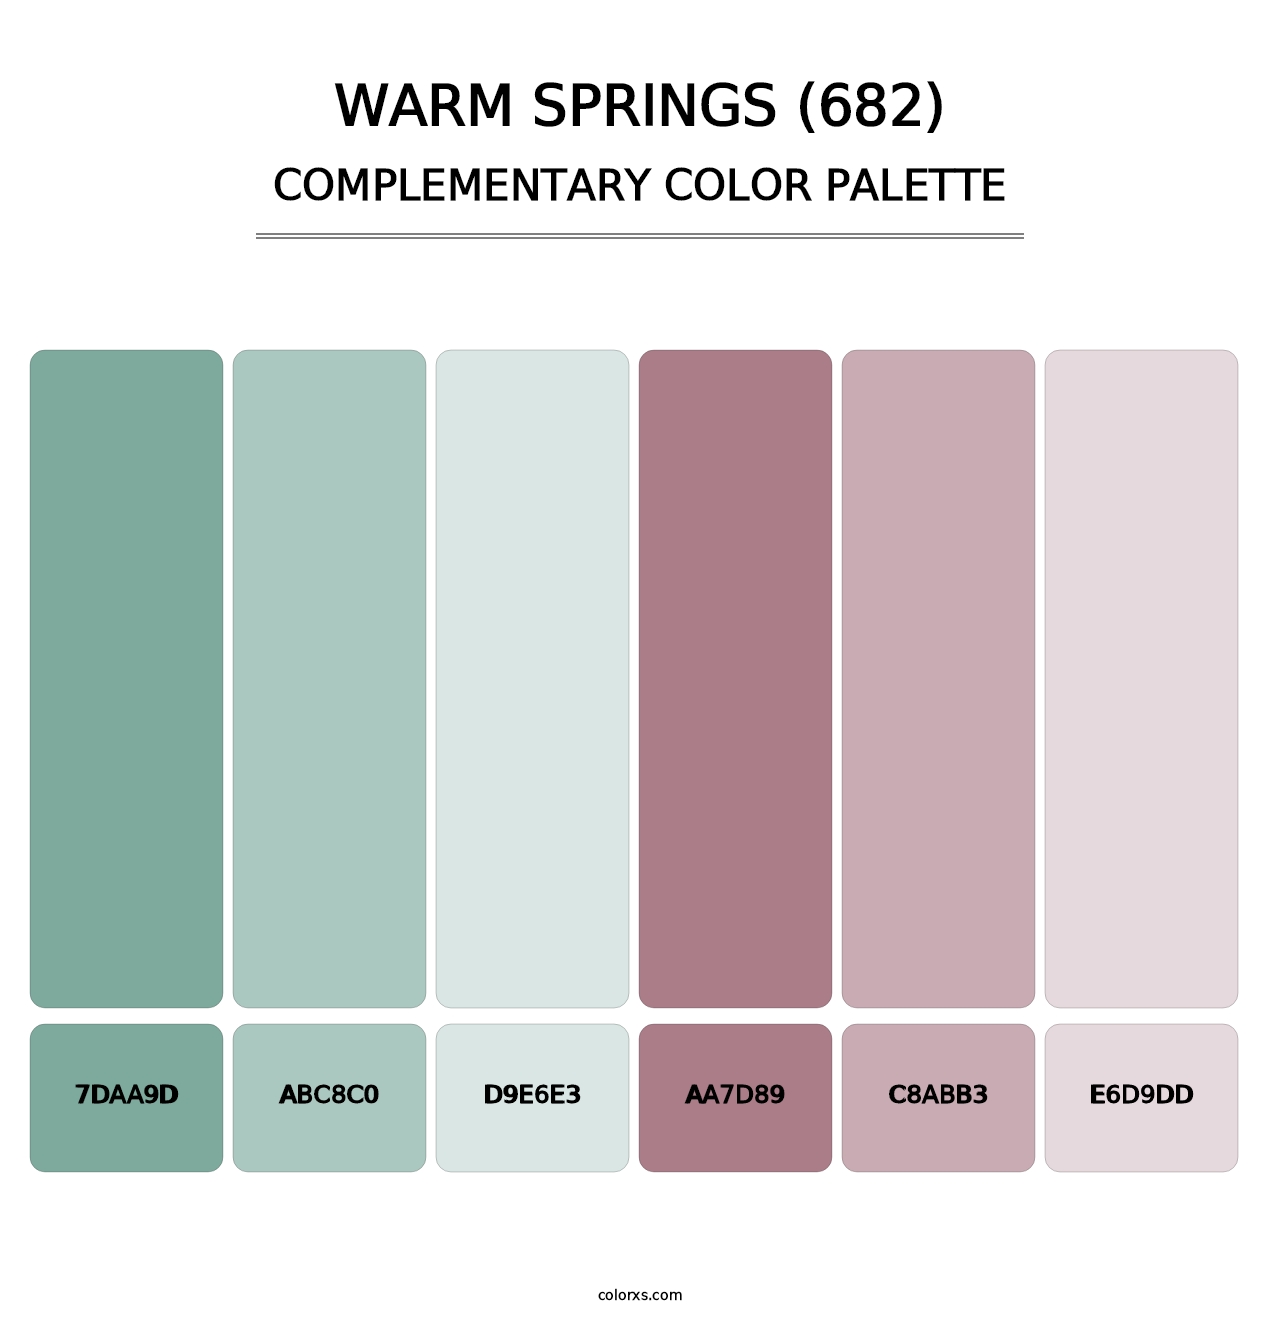 Warm Springs (682) - Complementary Color Palette